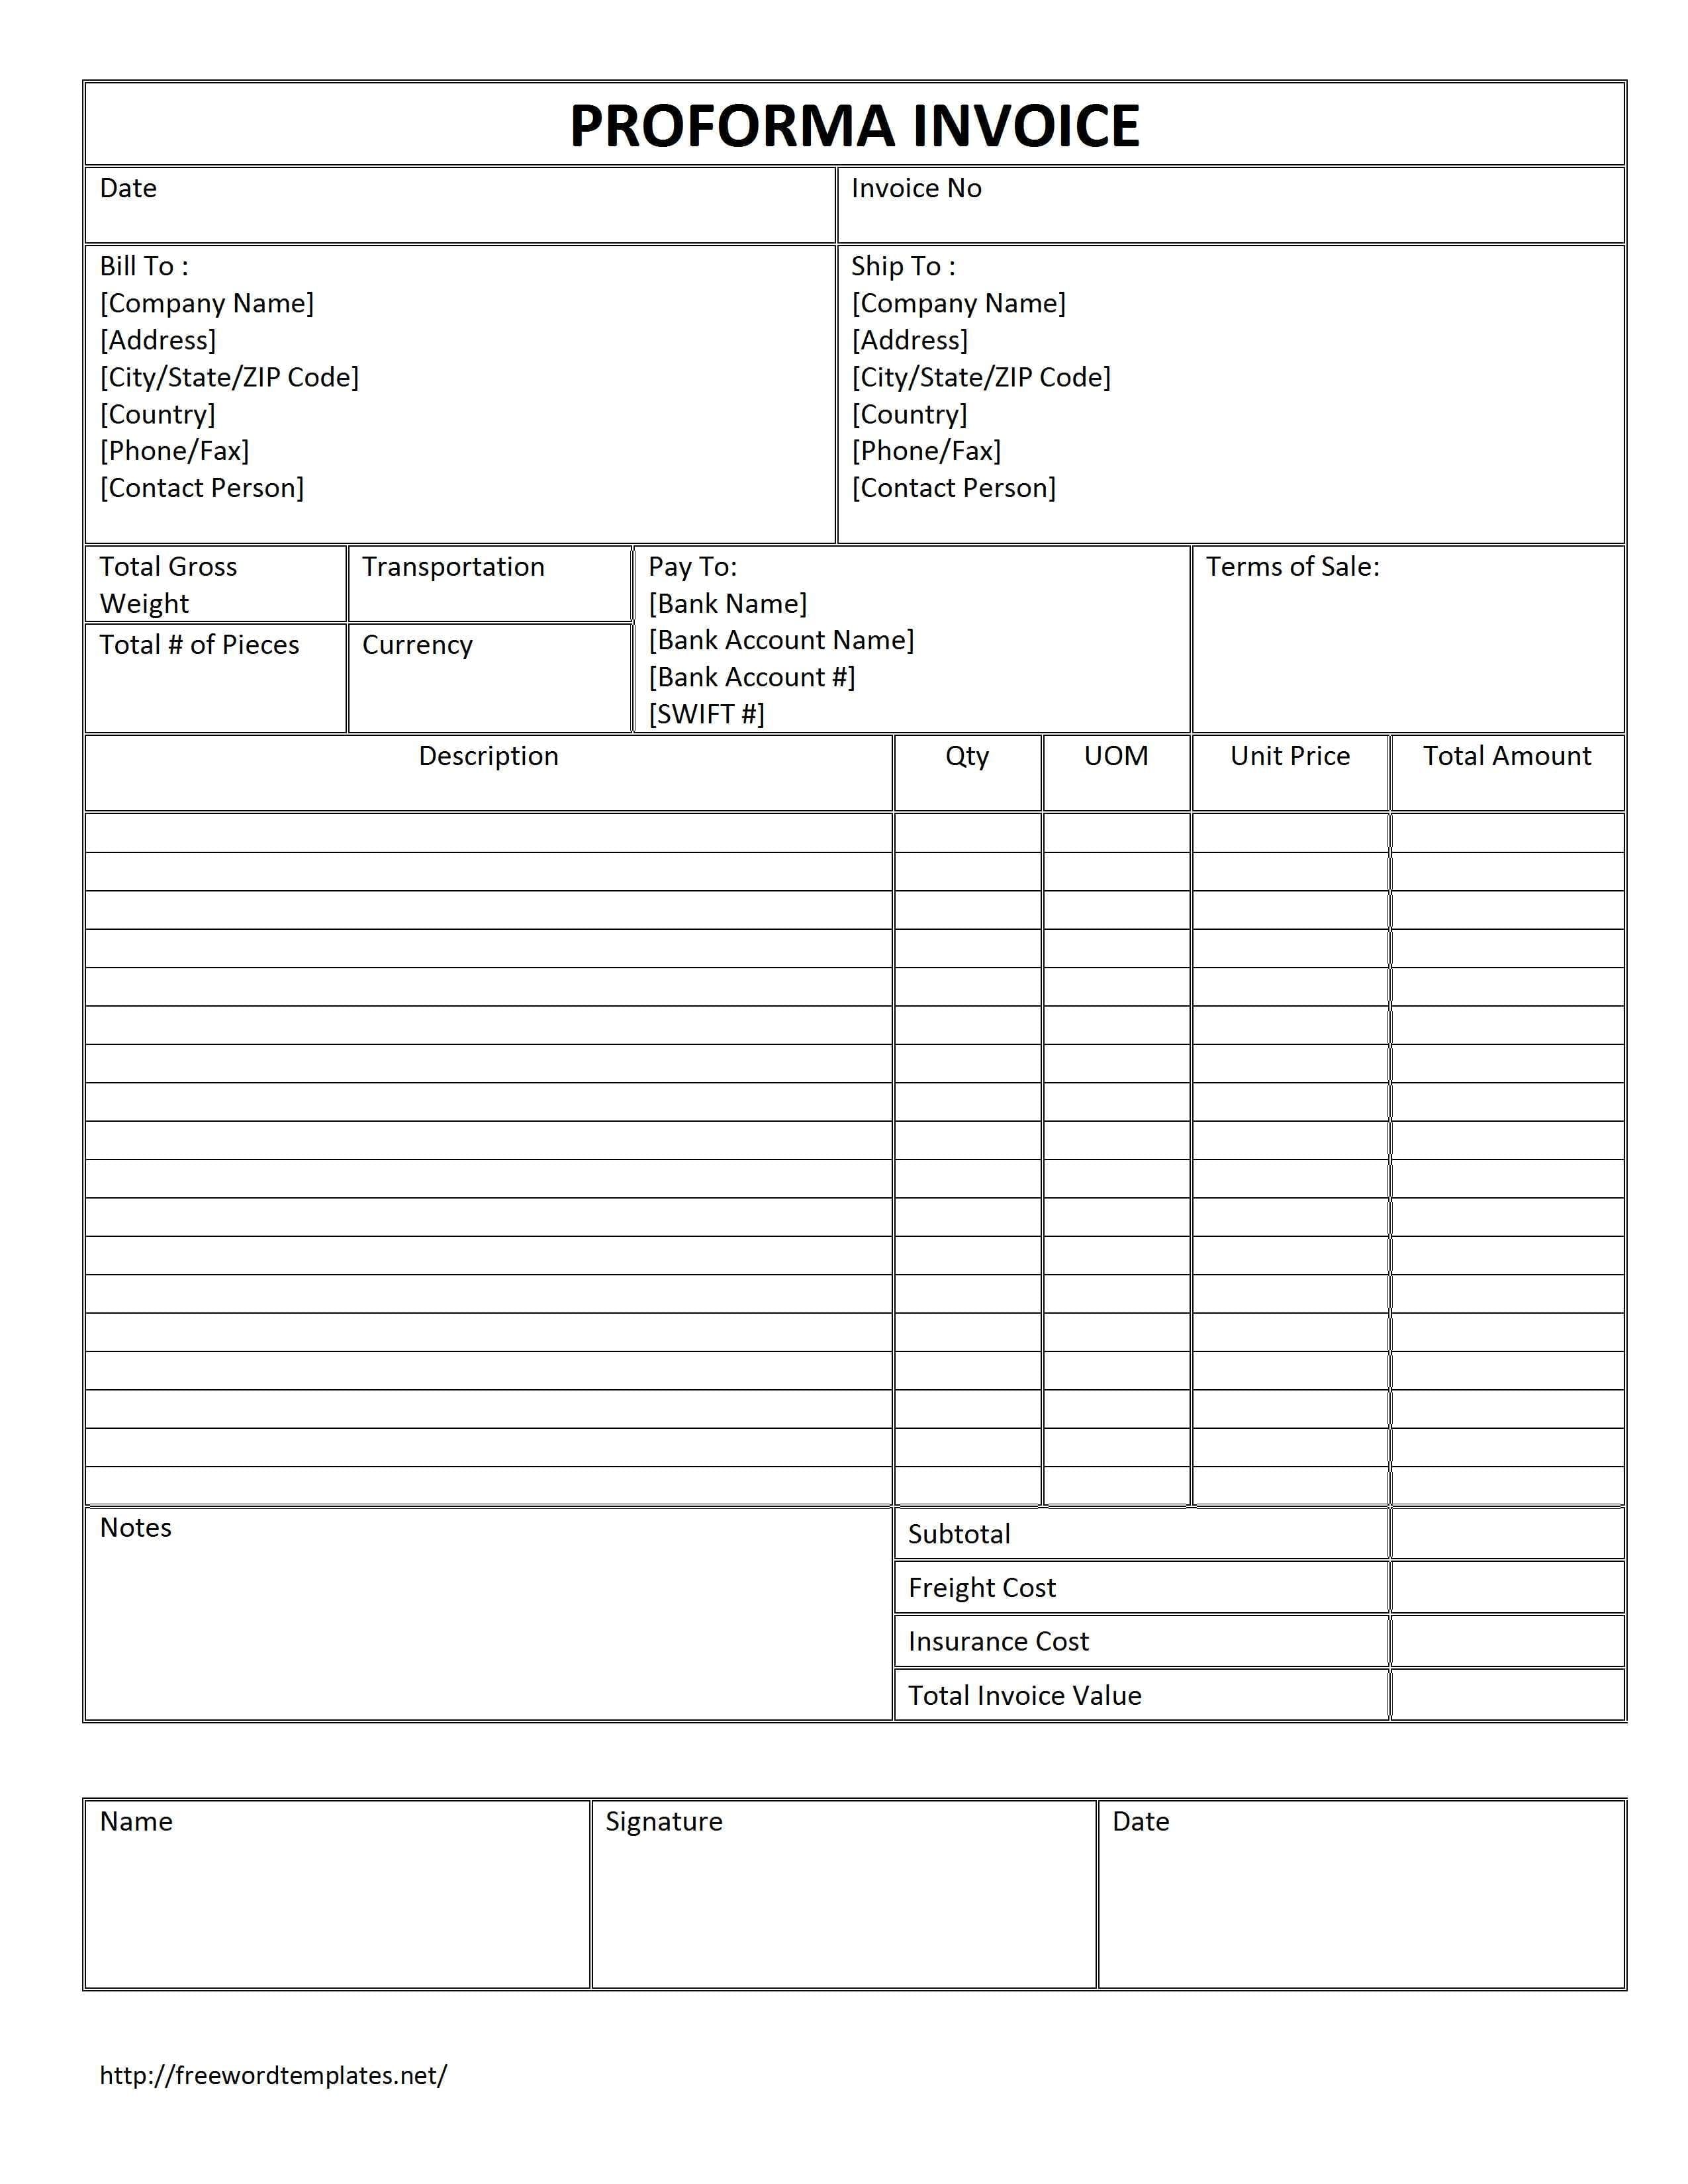 microsoft office invoice template excel — excelxo.com